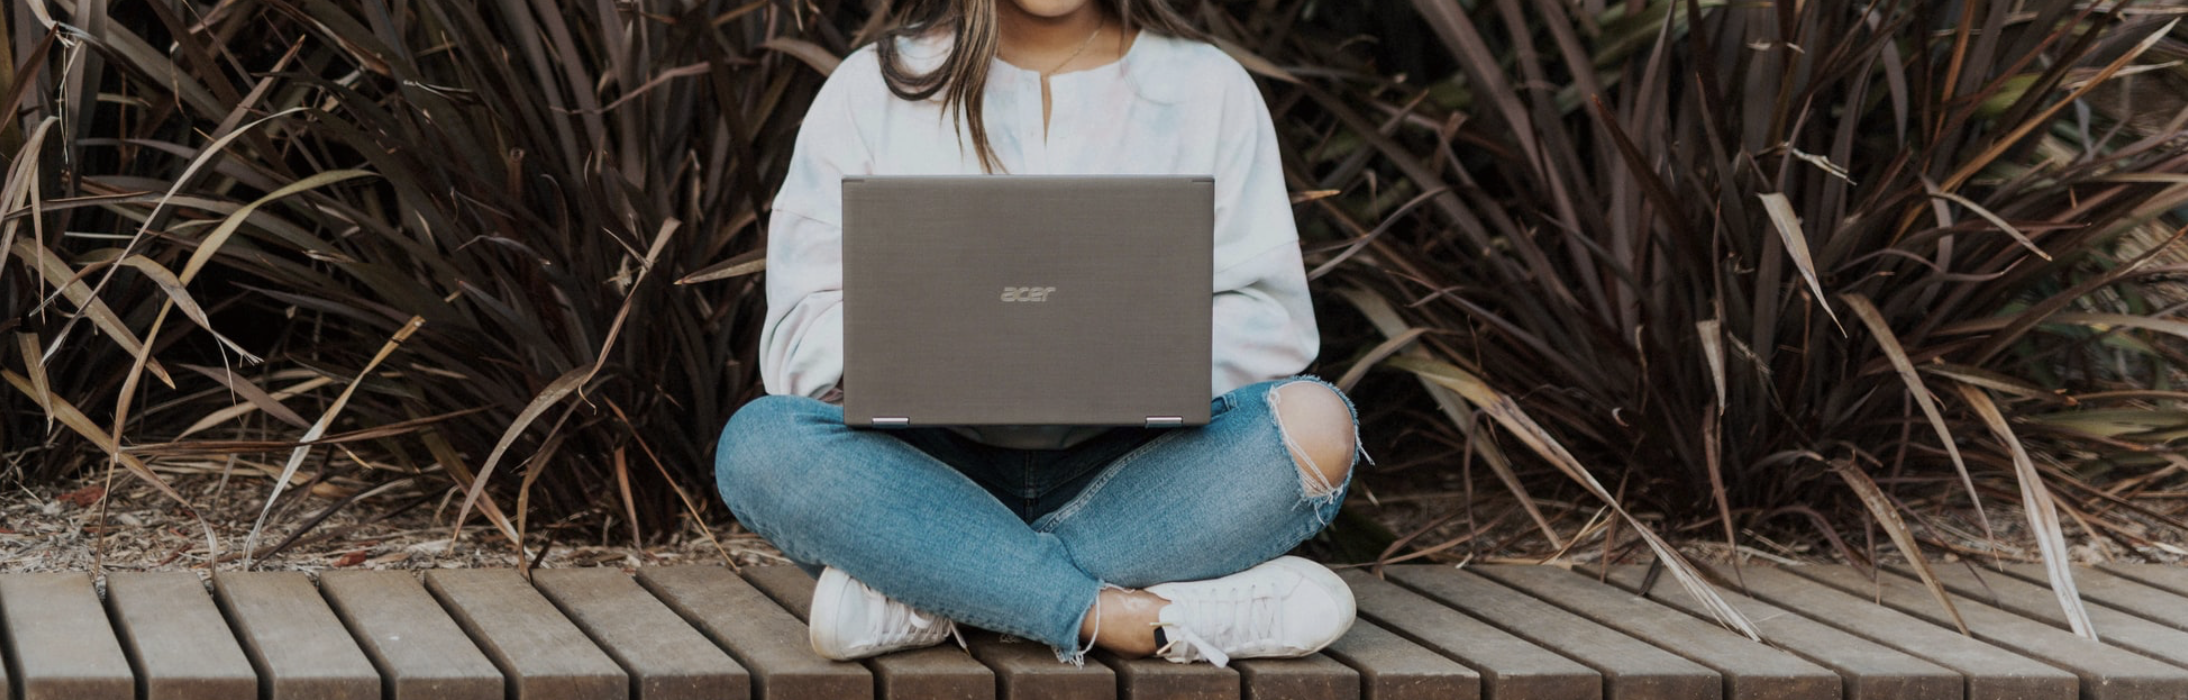 Girl typing on a computer outside by a plant